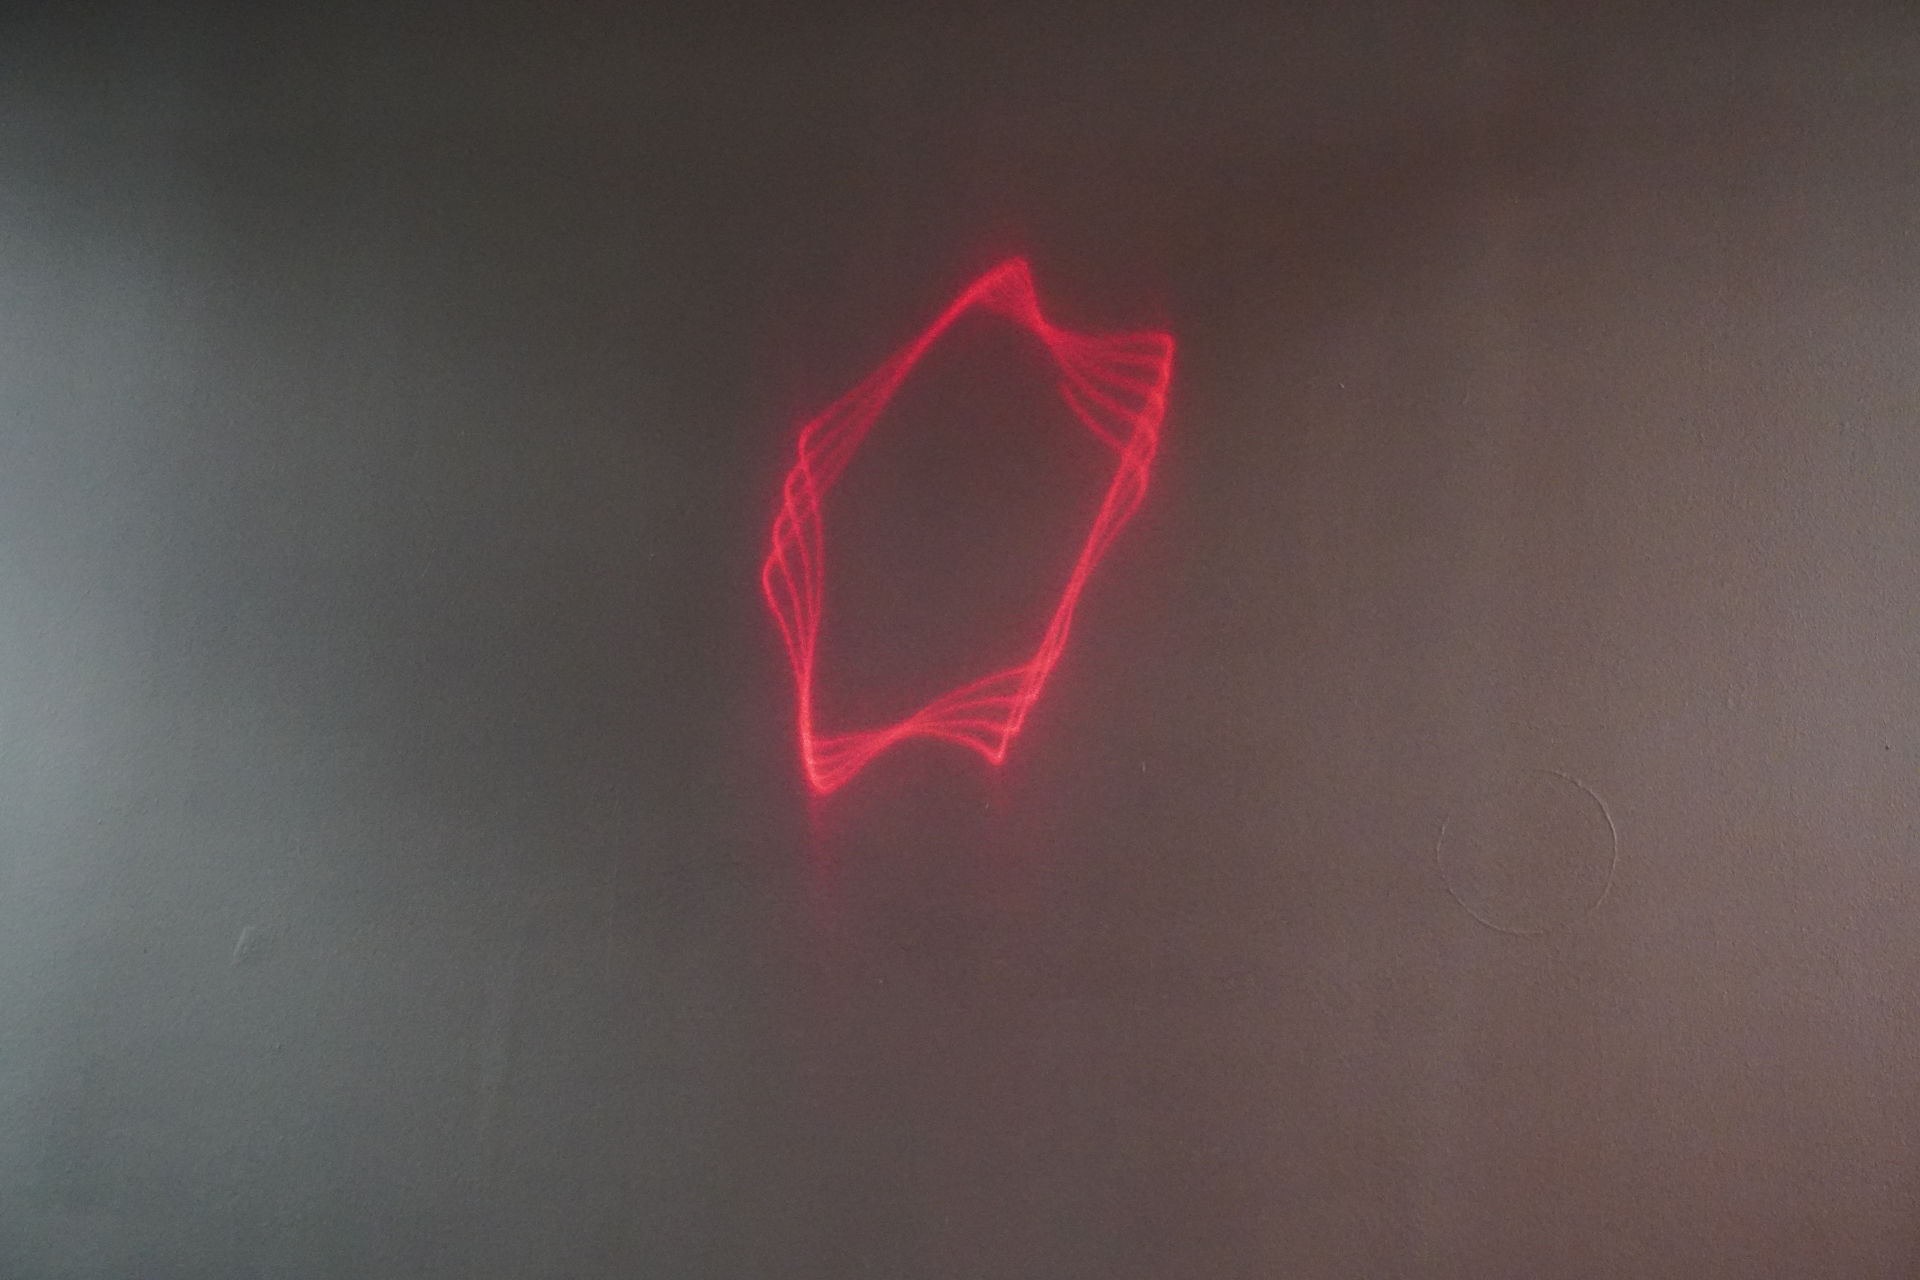 A red wave in star form projected on a wall